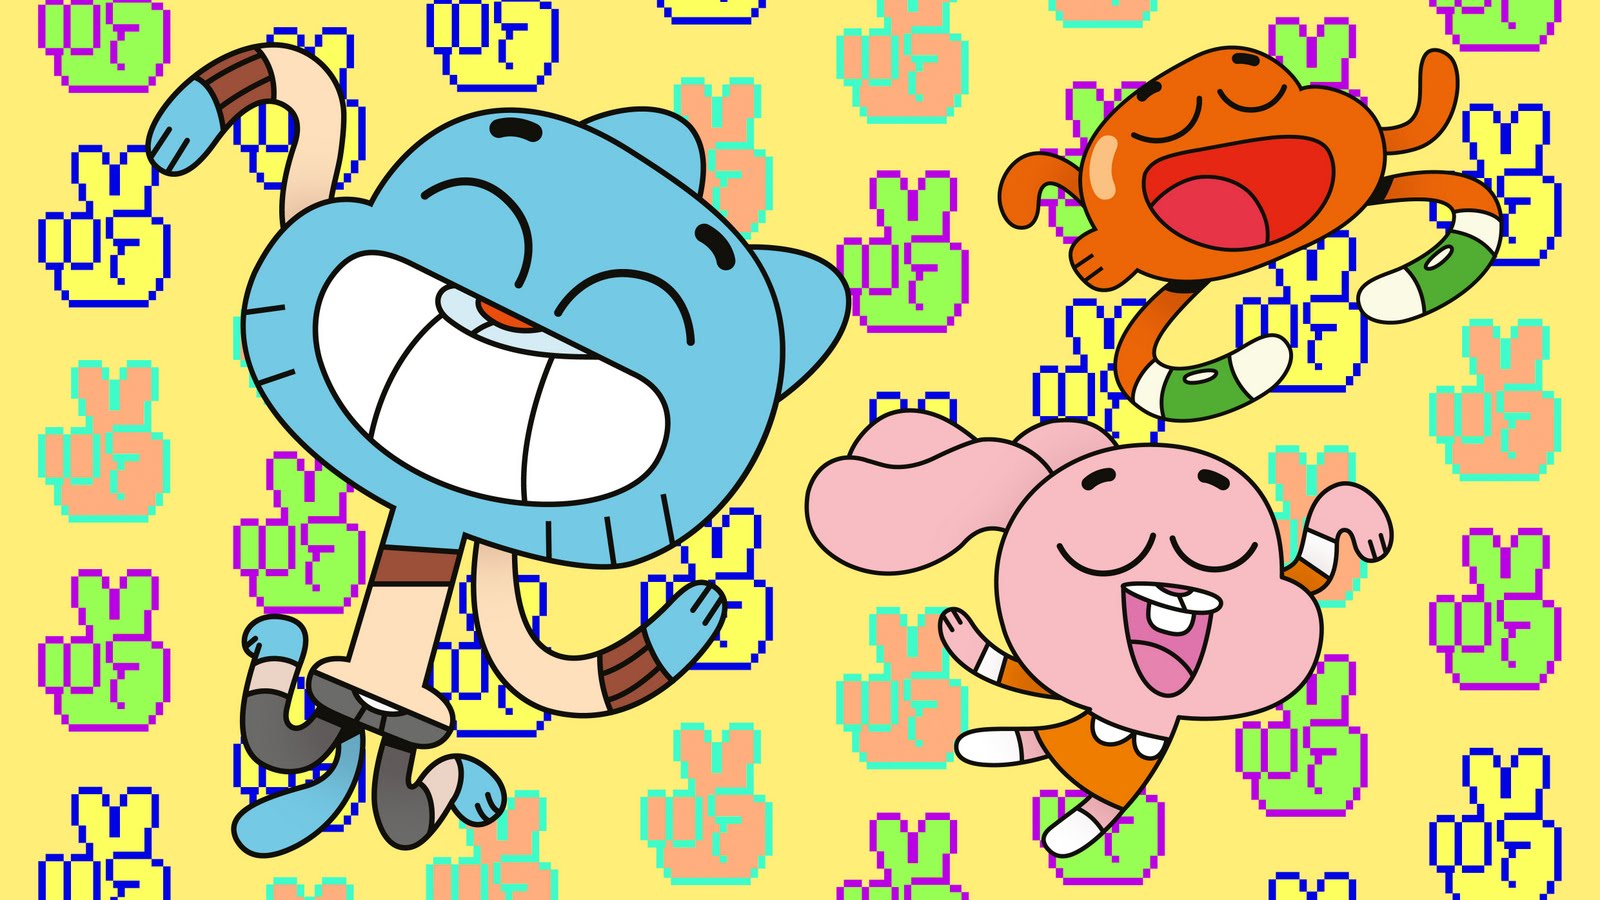 The Amazing World of Gumball Picture